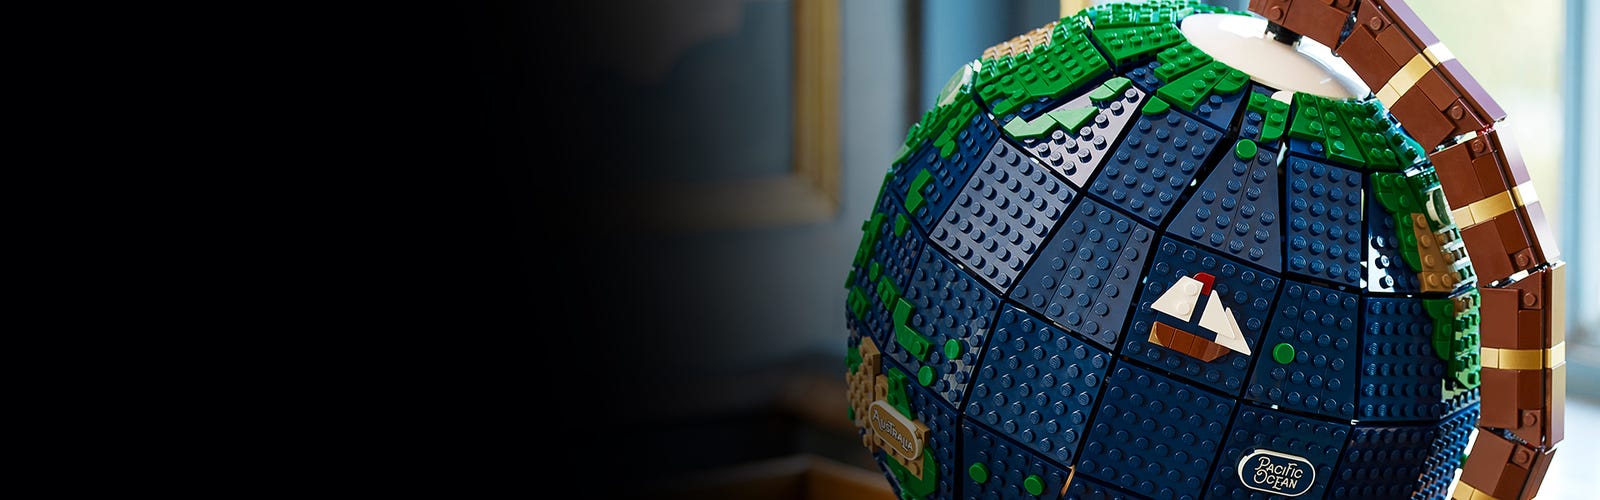 LEGO Globe: Hands-on with an out of this world set - 9to5Toys